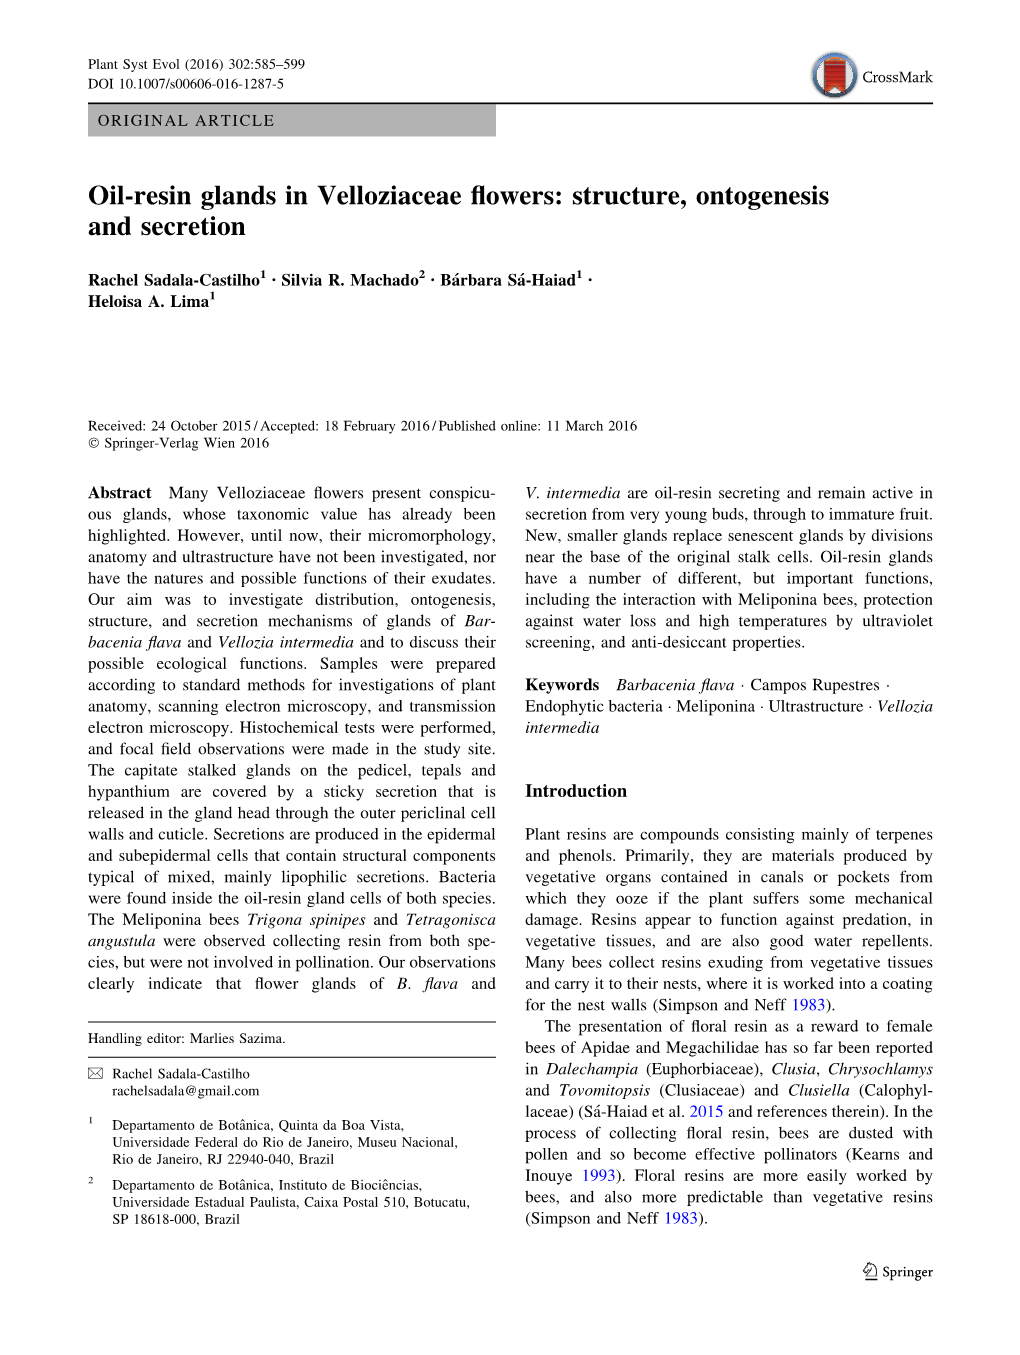 Oil-Resin Glands in Velloziaceae Flowers: Structure, Ontogenesis And